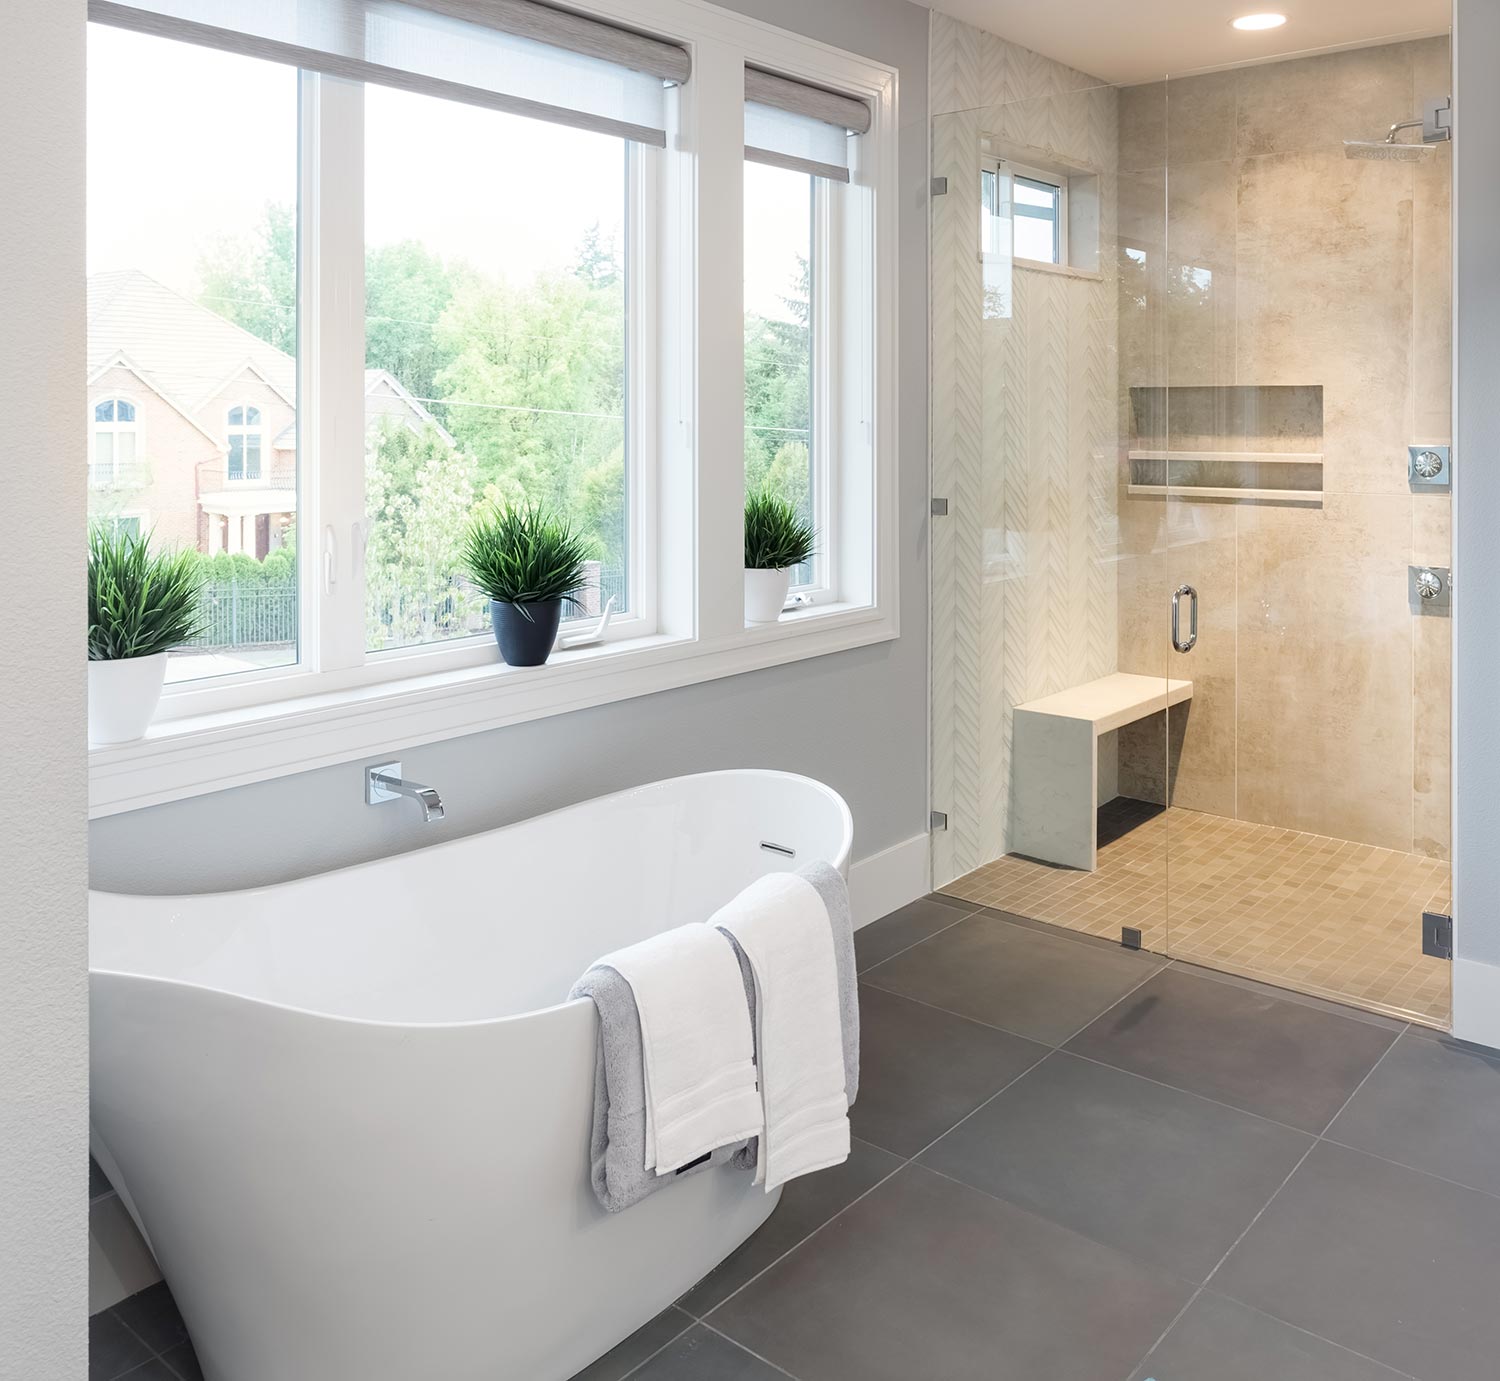 Bathtub and shower in new master bathroom interior in luxury home